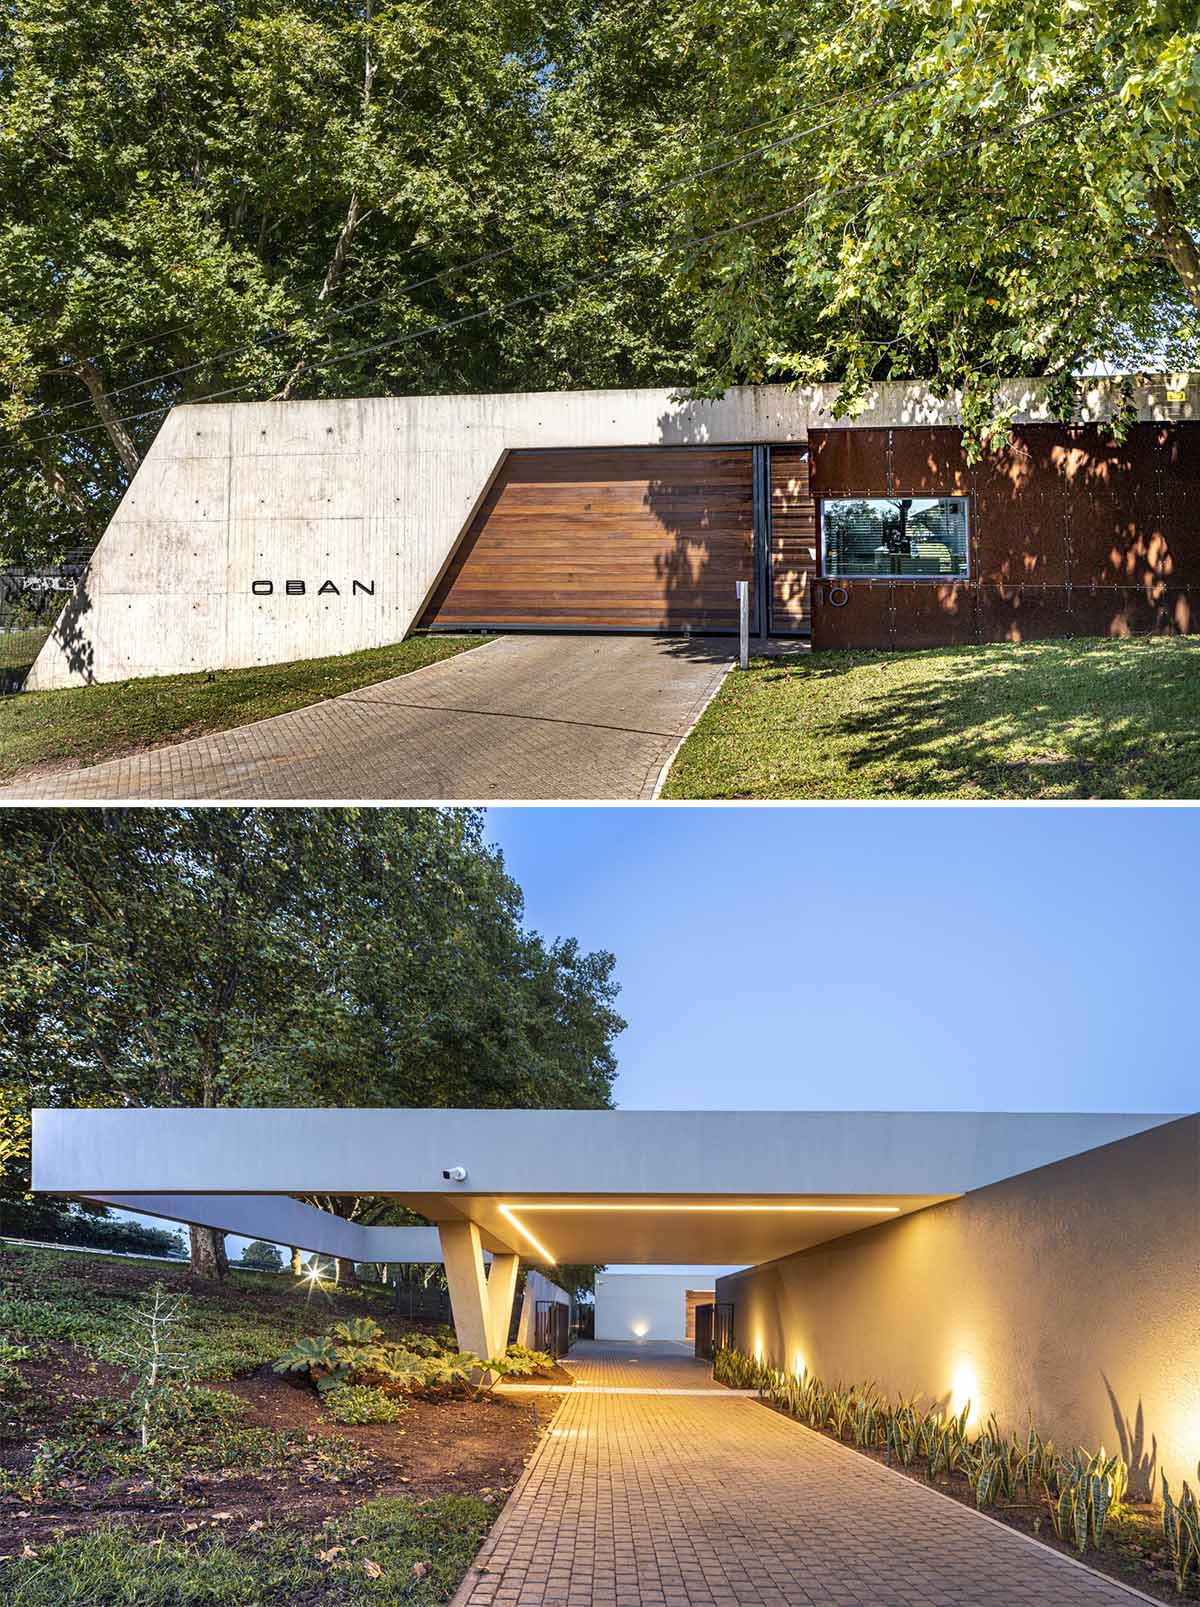 Upon arriving at this modern estate, people drive through a raw concrete and corten gatehouse.